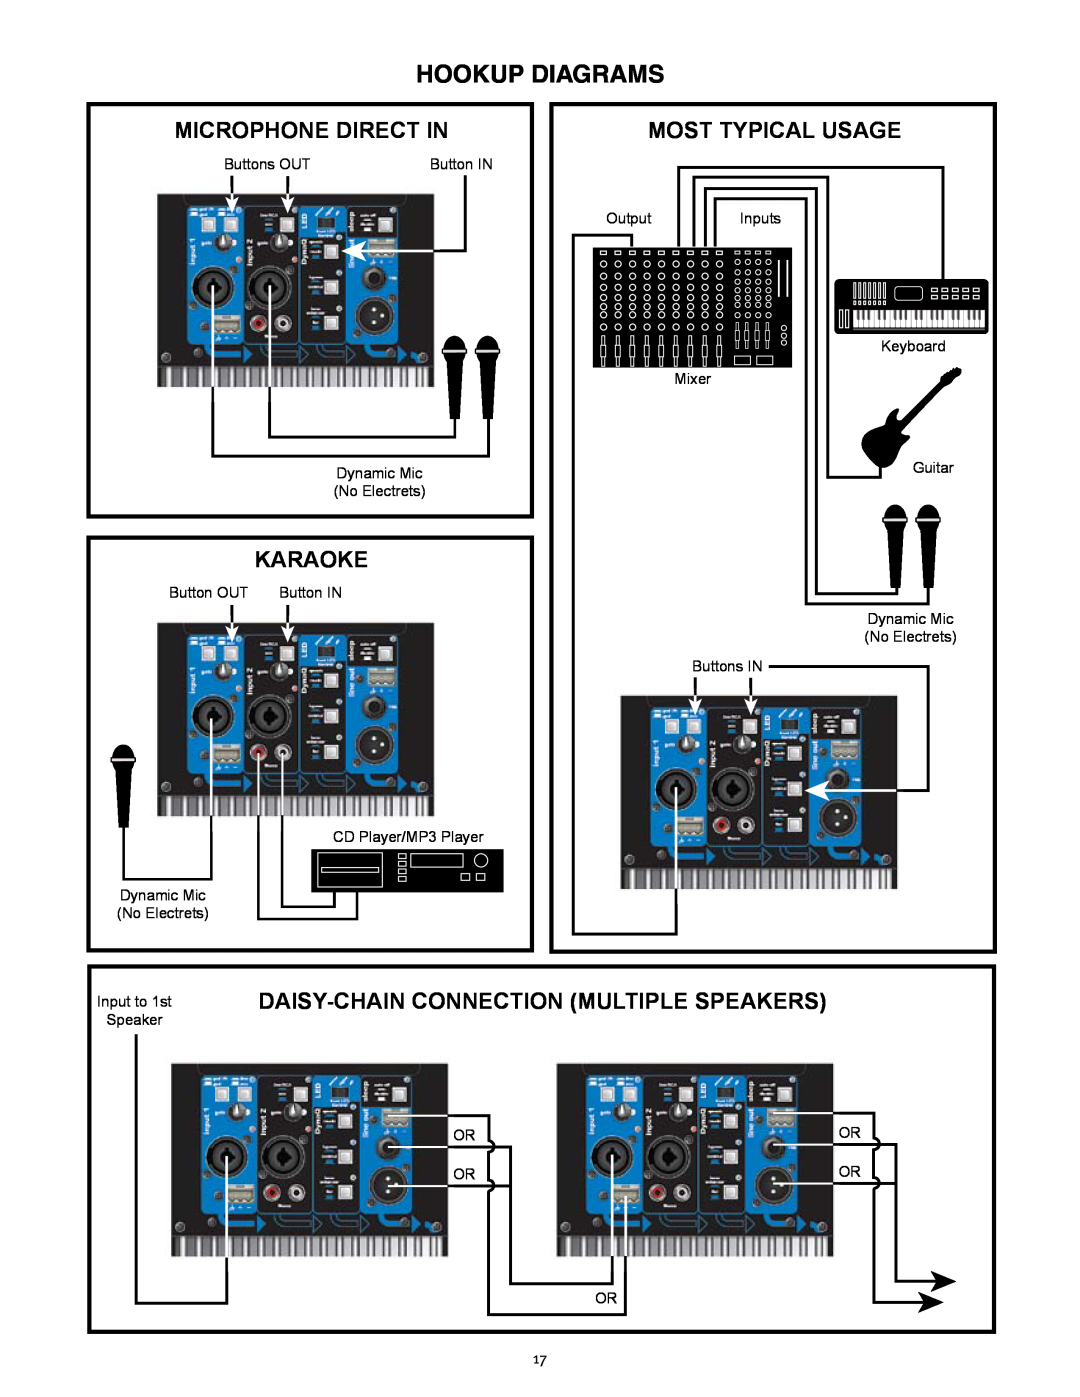 Peavey 12 D Hookup Diagrams, Microphone Direct In, Karaoke, Most Typical Usage, Daisy-Chainconnection Multiple Speakers 